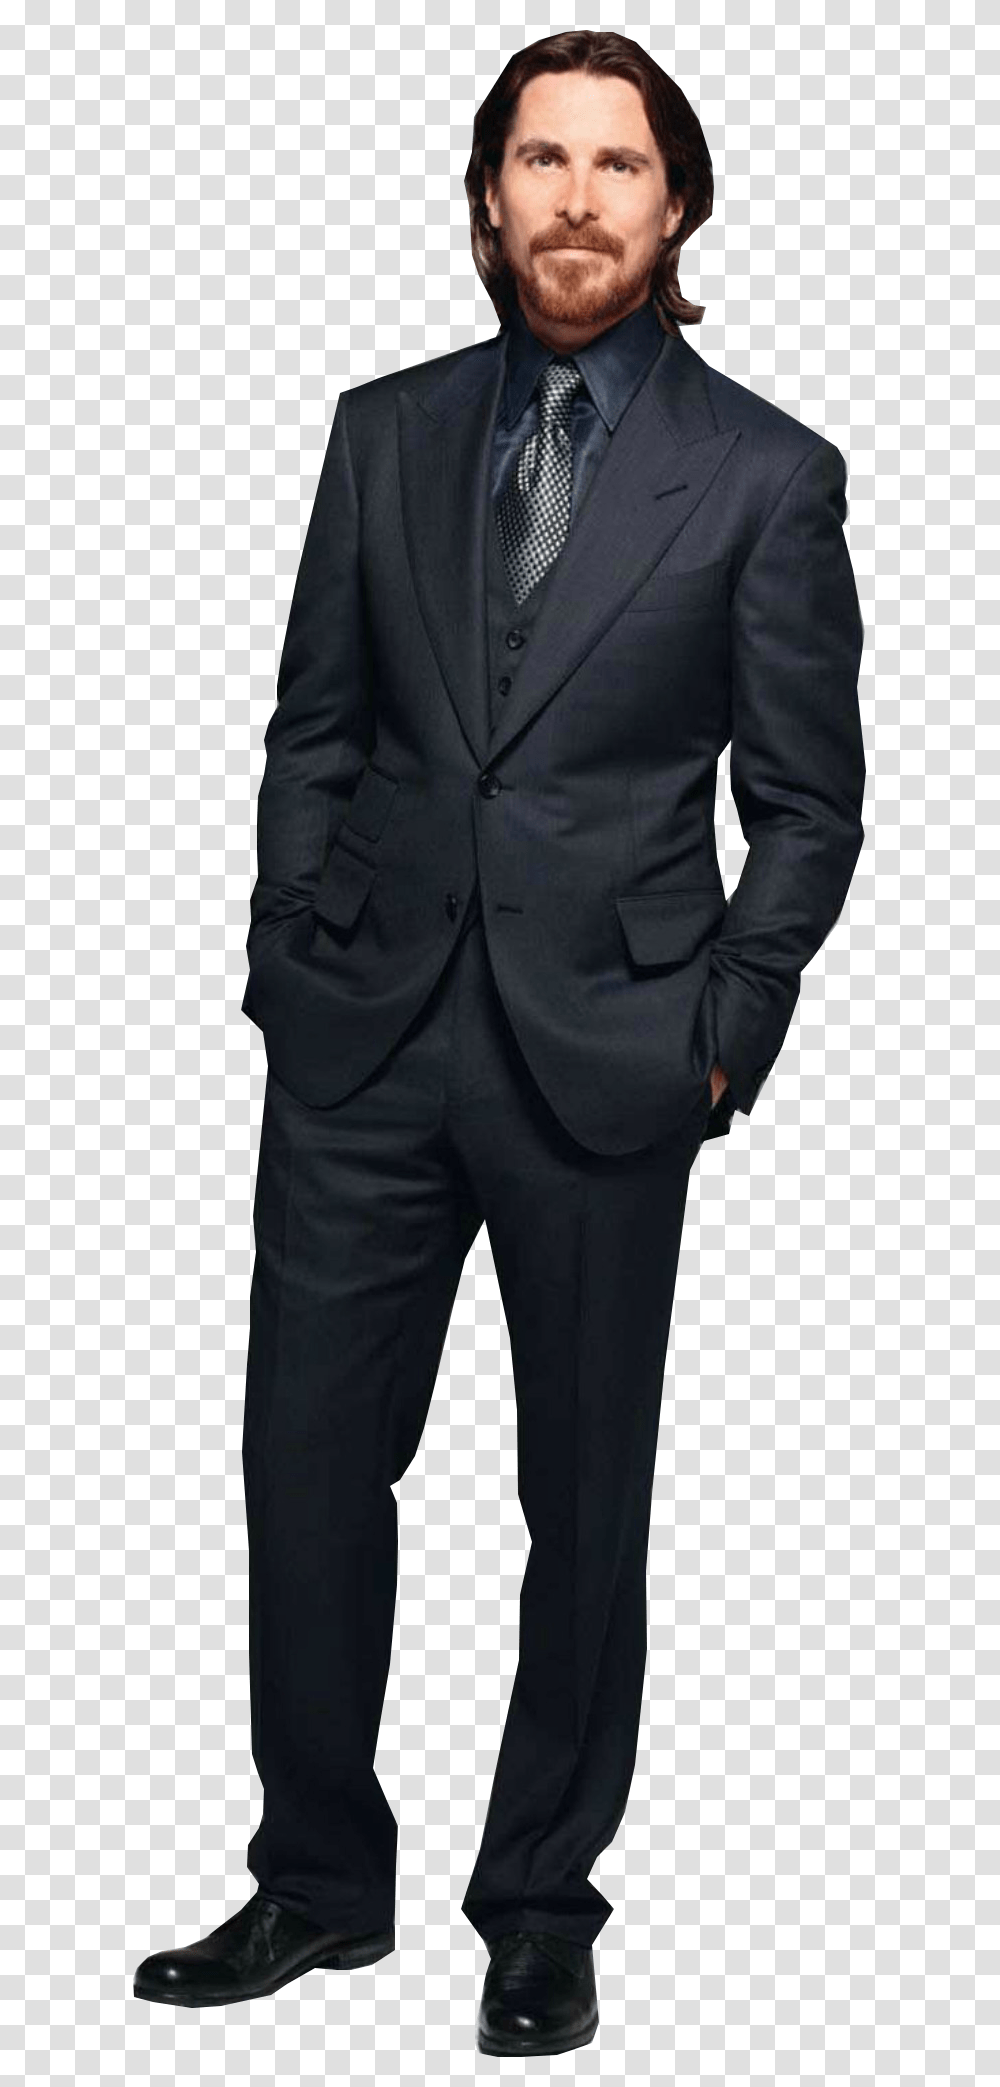 Christianbale Christian Bale Oscars Vice Businessman Full Body, Suit, Overcoat, Tie Transparent Png